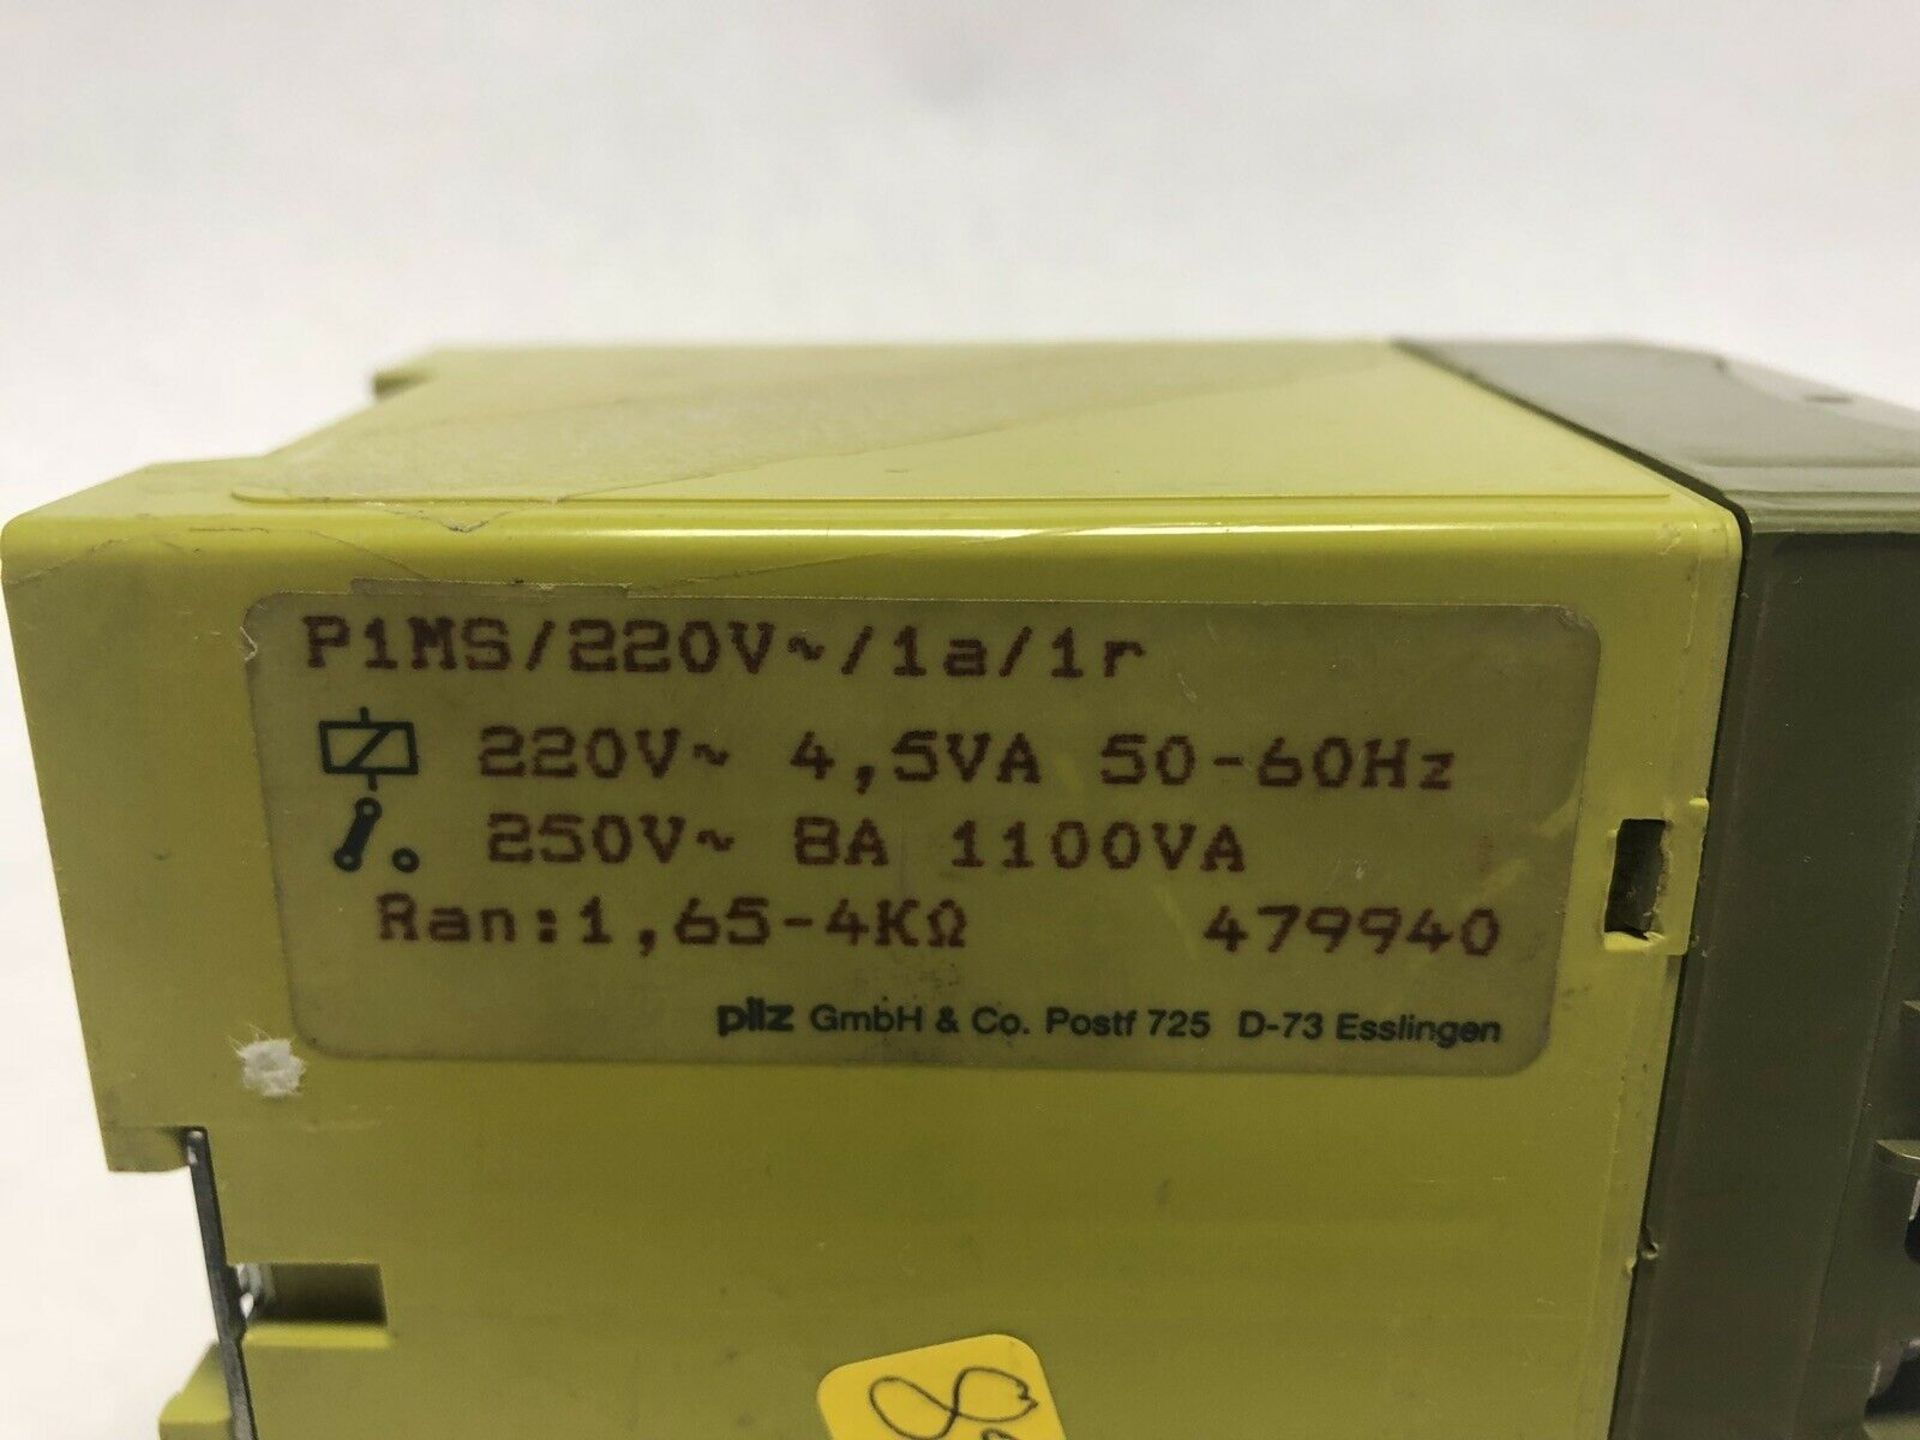 PILZ P1MS THERMISTOR SAFETY RELAY - Image 2 of 2